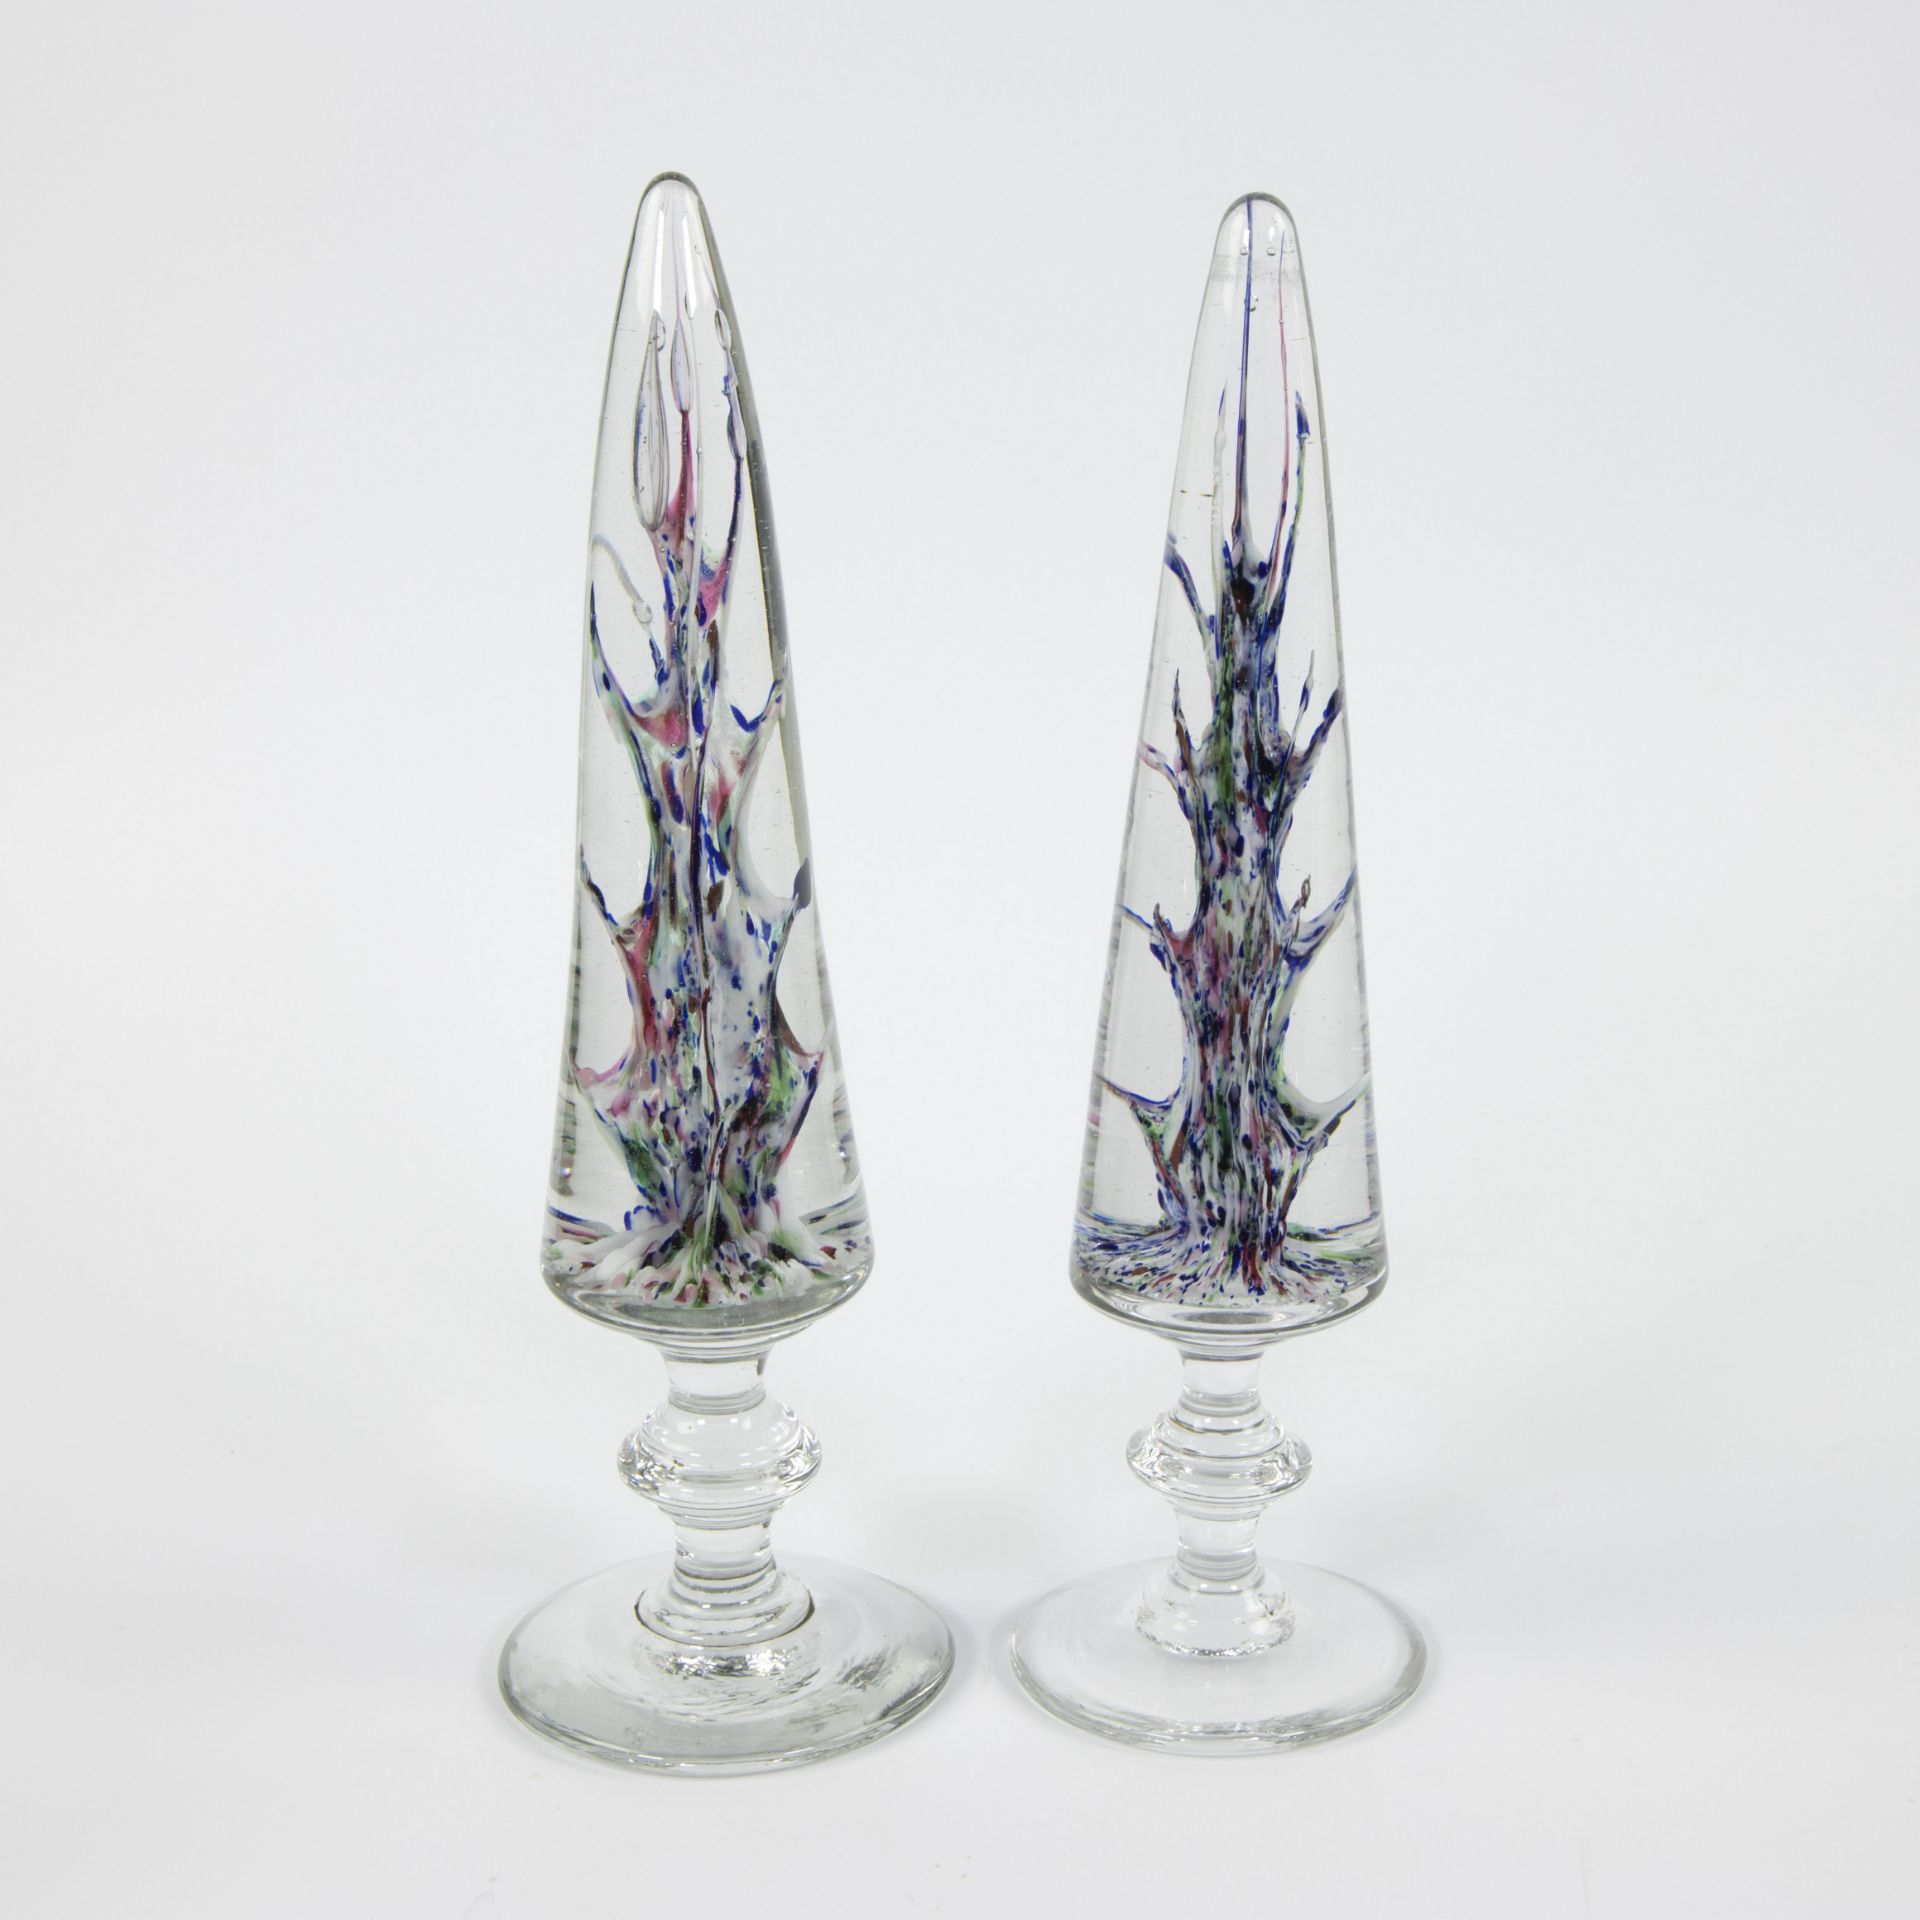 2 conical glass paperweight Herbatte Namur, circa 1900